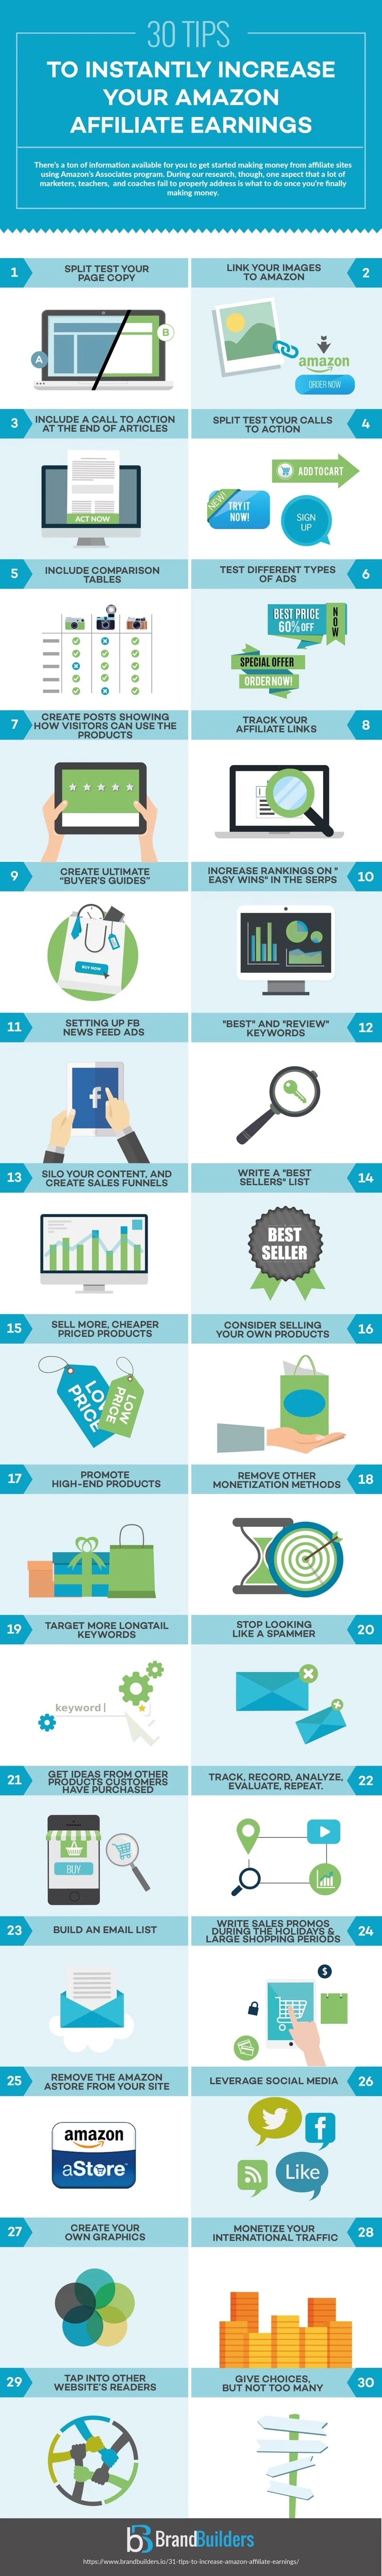 30 Easy Ways to Increase Your Amazon Affiliate Earnings - #Infographic